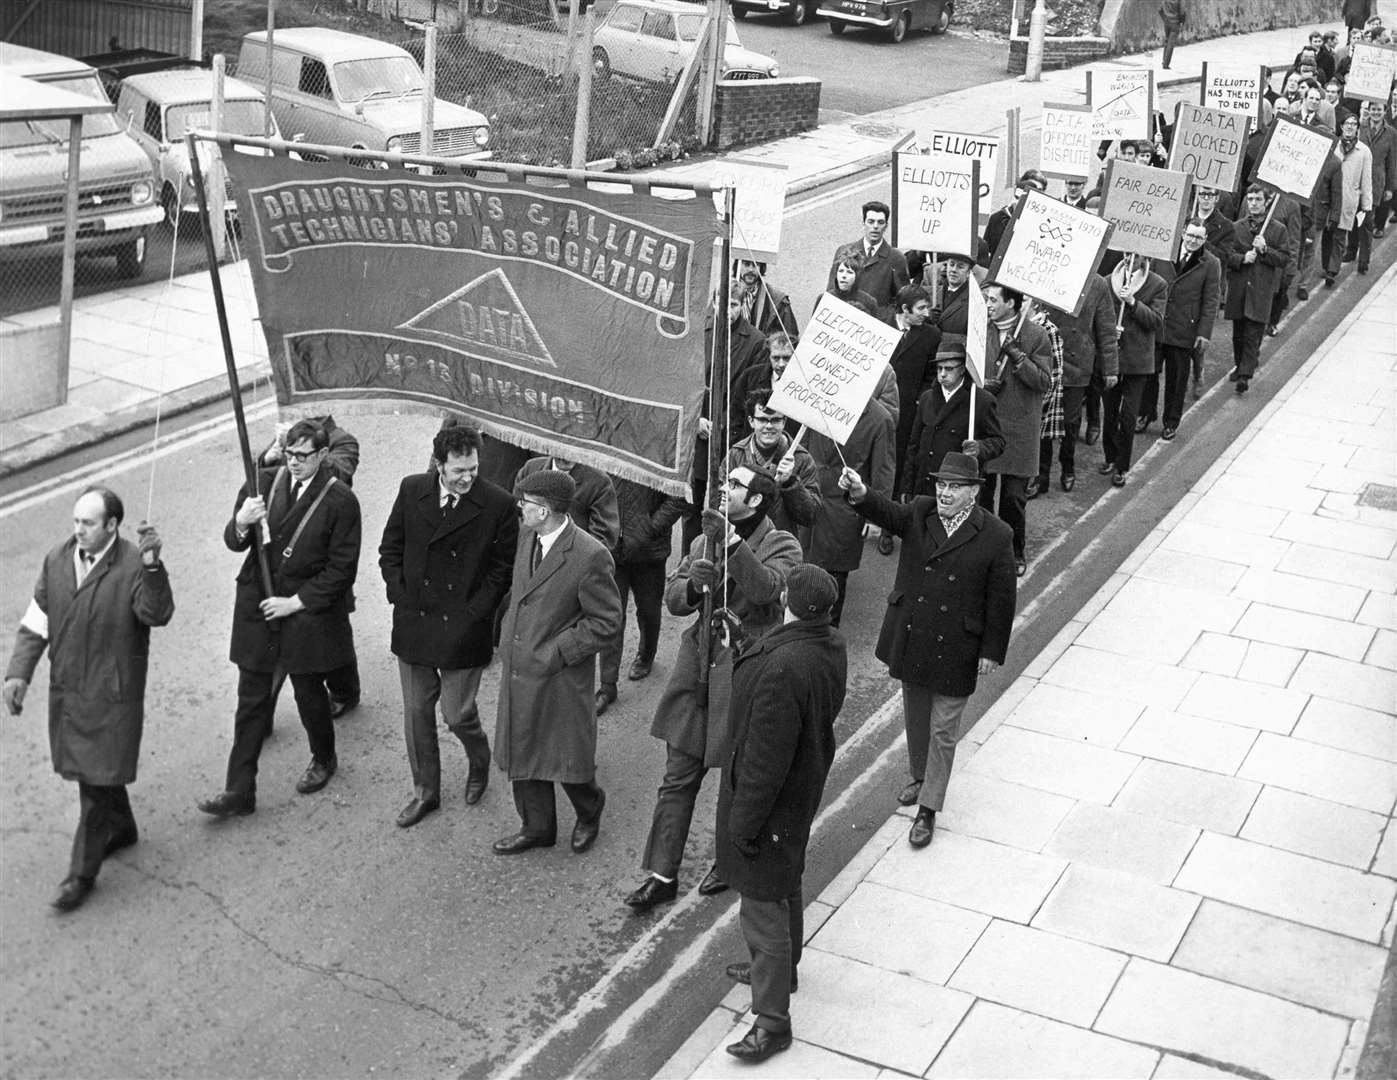 Members of the Draughtmen's and Allied Technicians' Association march to Elliott's works at Rochester in 1970 after holding a protest meeting in a local church hall